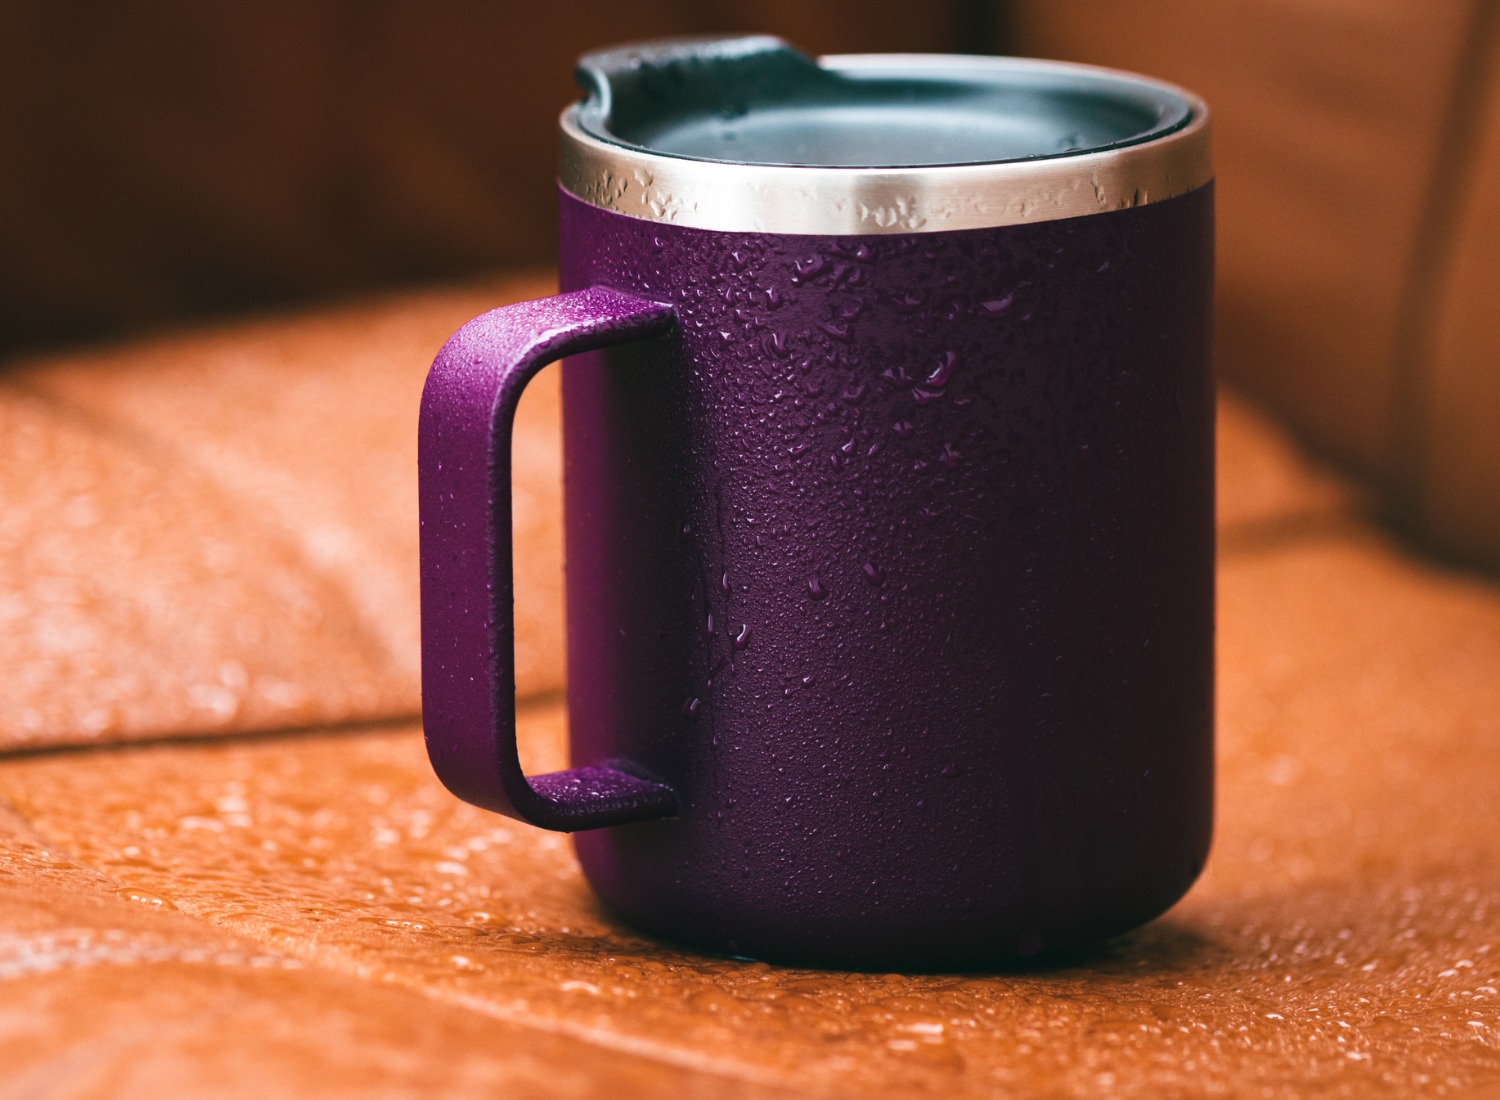 https://www.cuisineathome.com/review/wp-content/uploads/2023/07/purple-color-isothermal-mug-in-the-rain.jpg_s1024x1024wisk20cLLaOFYgg6WyAgPHyd1DfVMhimJR-EV1mi01PNoVw8gI.jpg